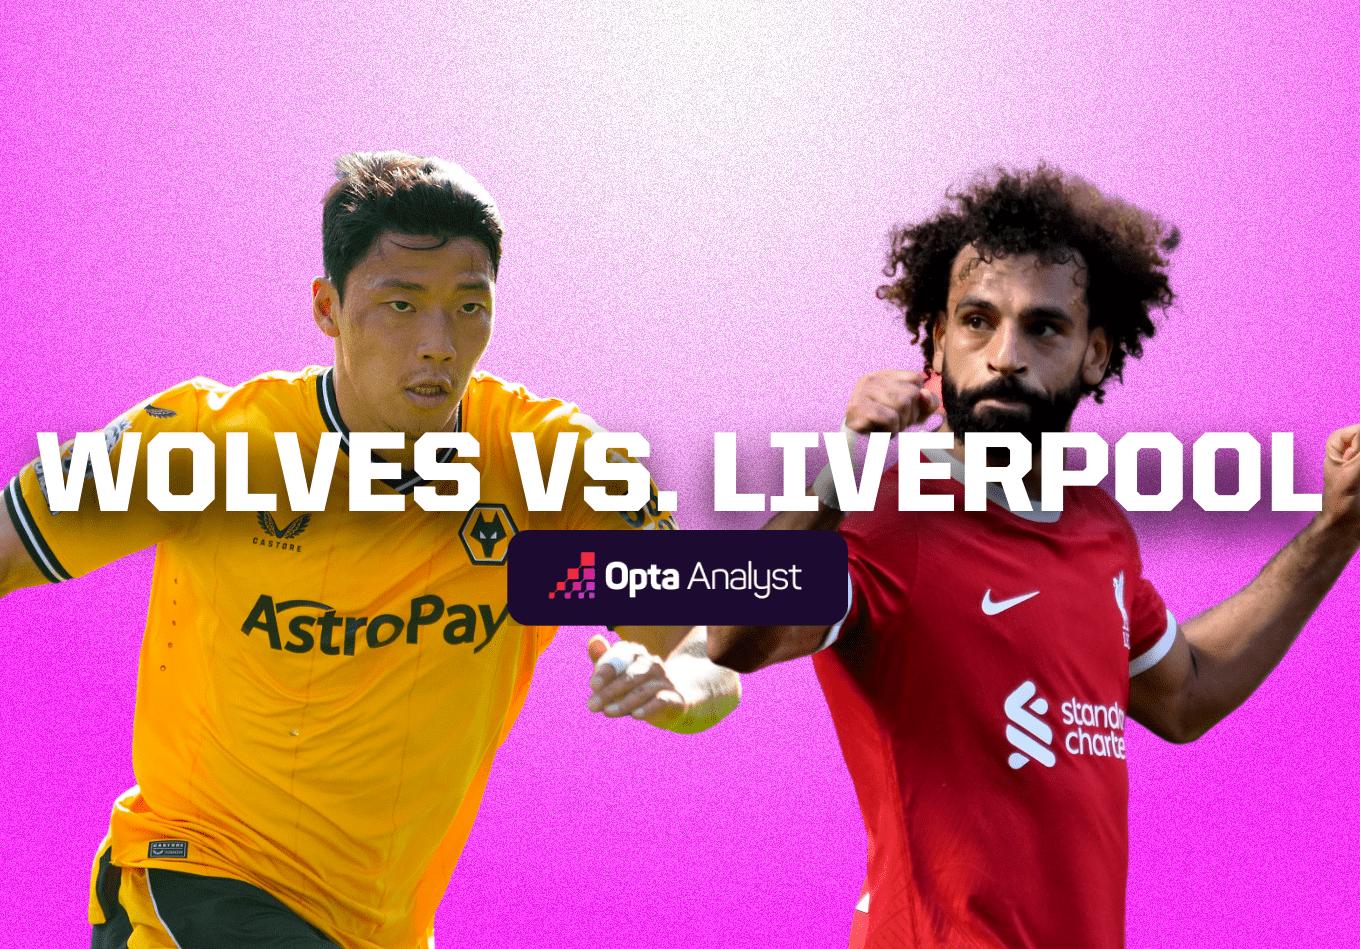 Wolves vs Liverpool: Prediction and Preview